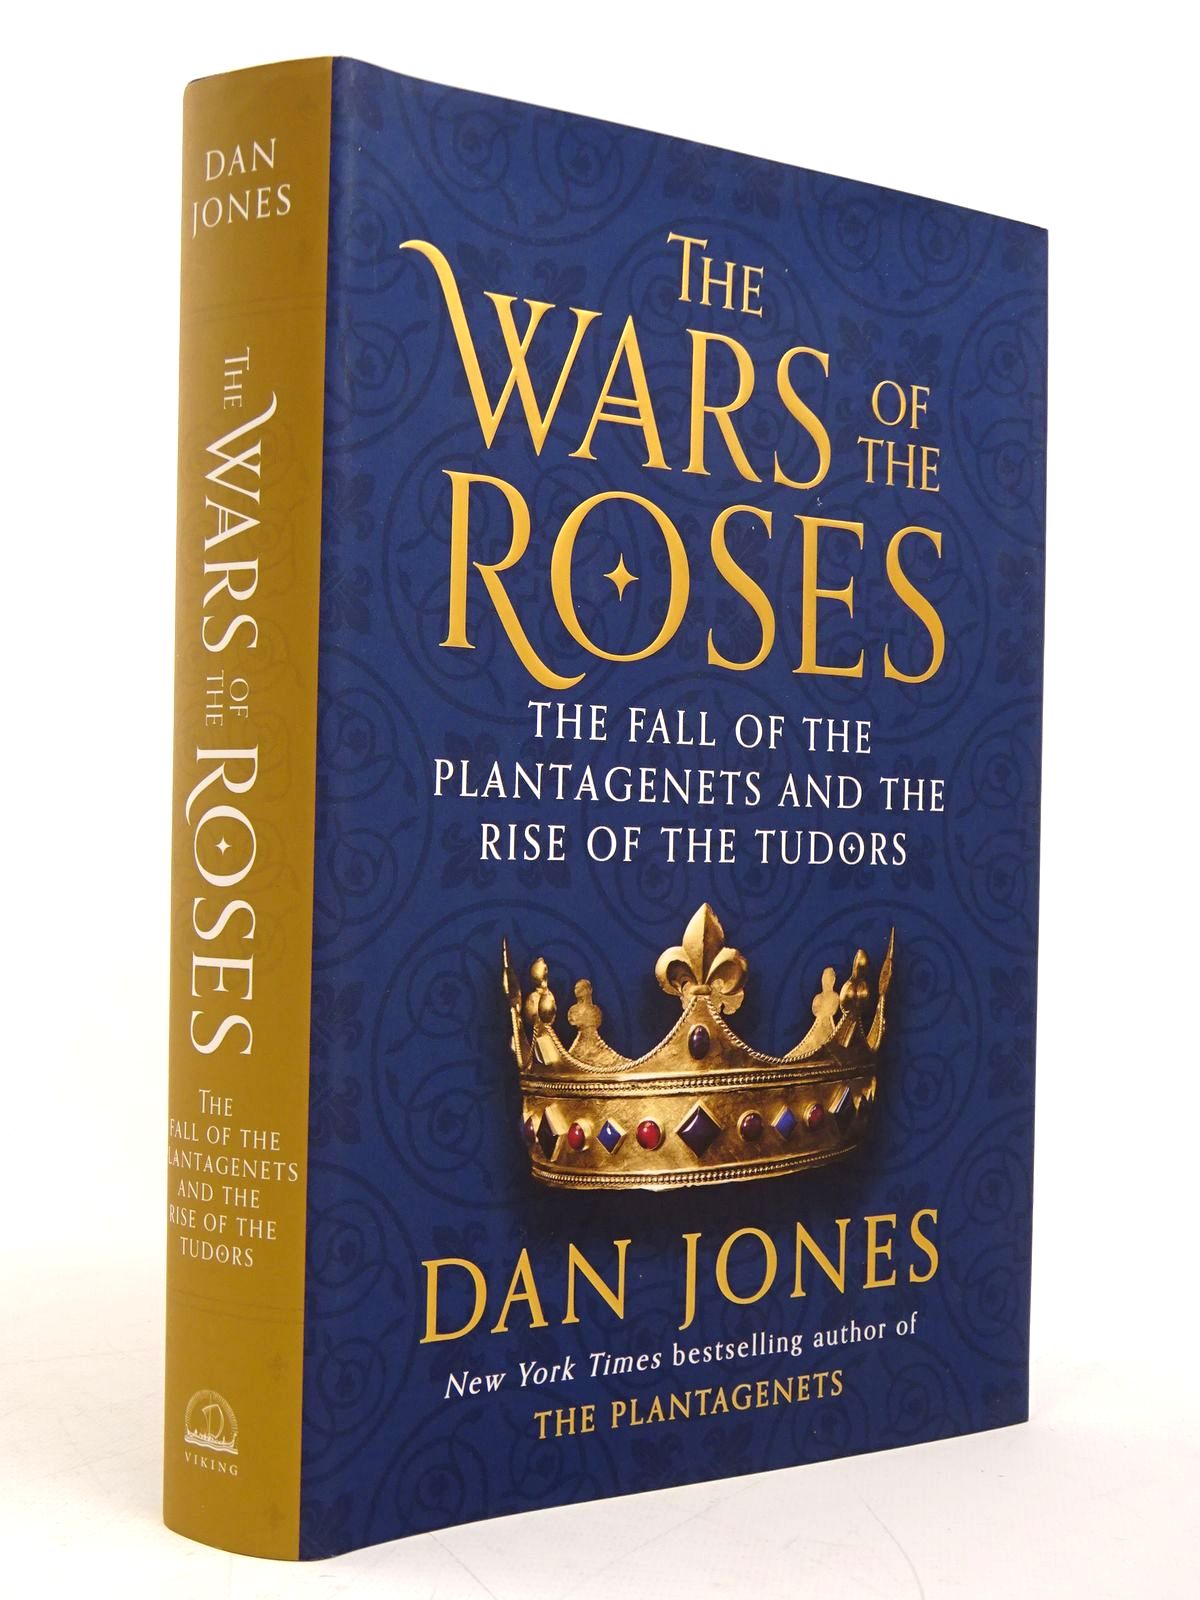 The Wars of the Roses: The Fall of the Plantagenets and the Rise of the  Tudors by Dan Jones